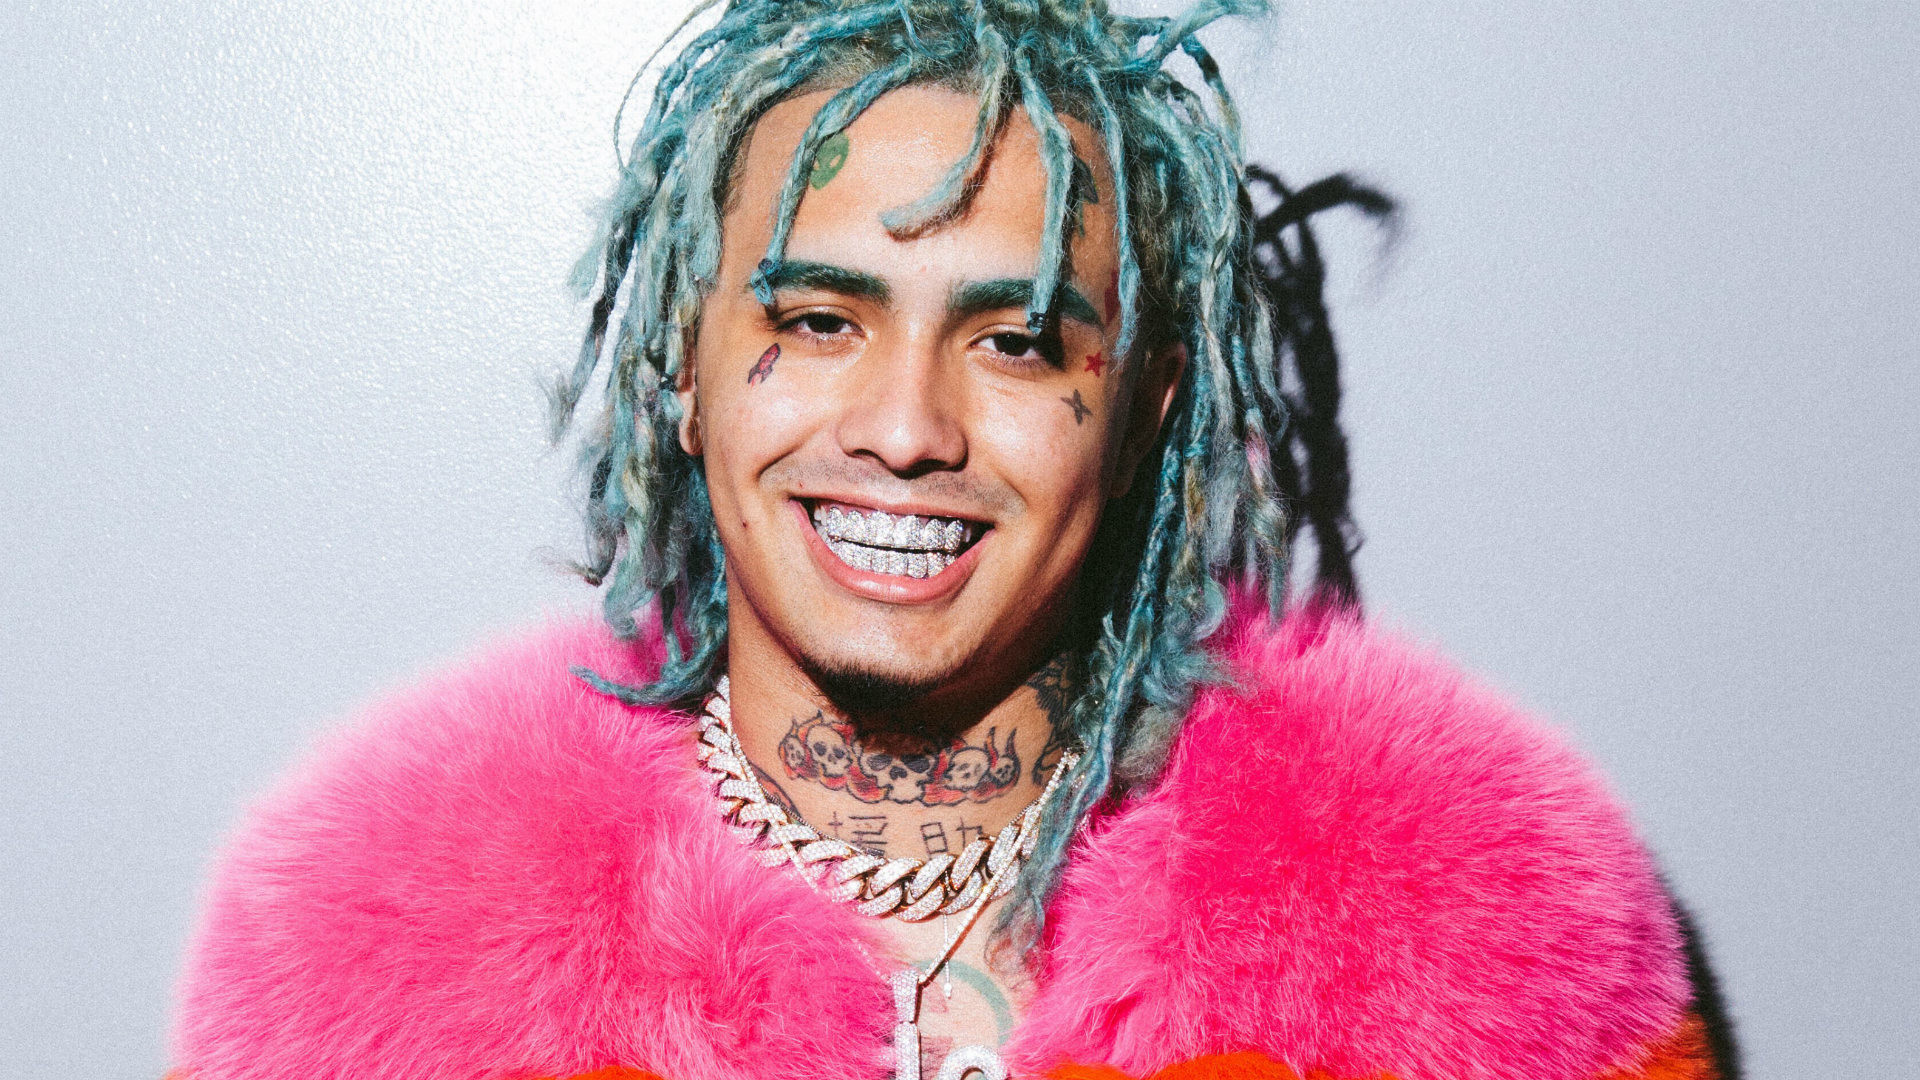 Chinese Rappers Beef with Lil Pump After Racism Storm: Here are 6 Fierce Di...